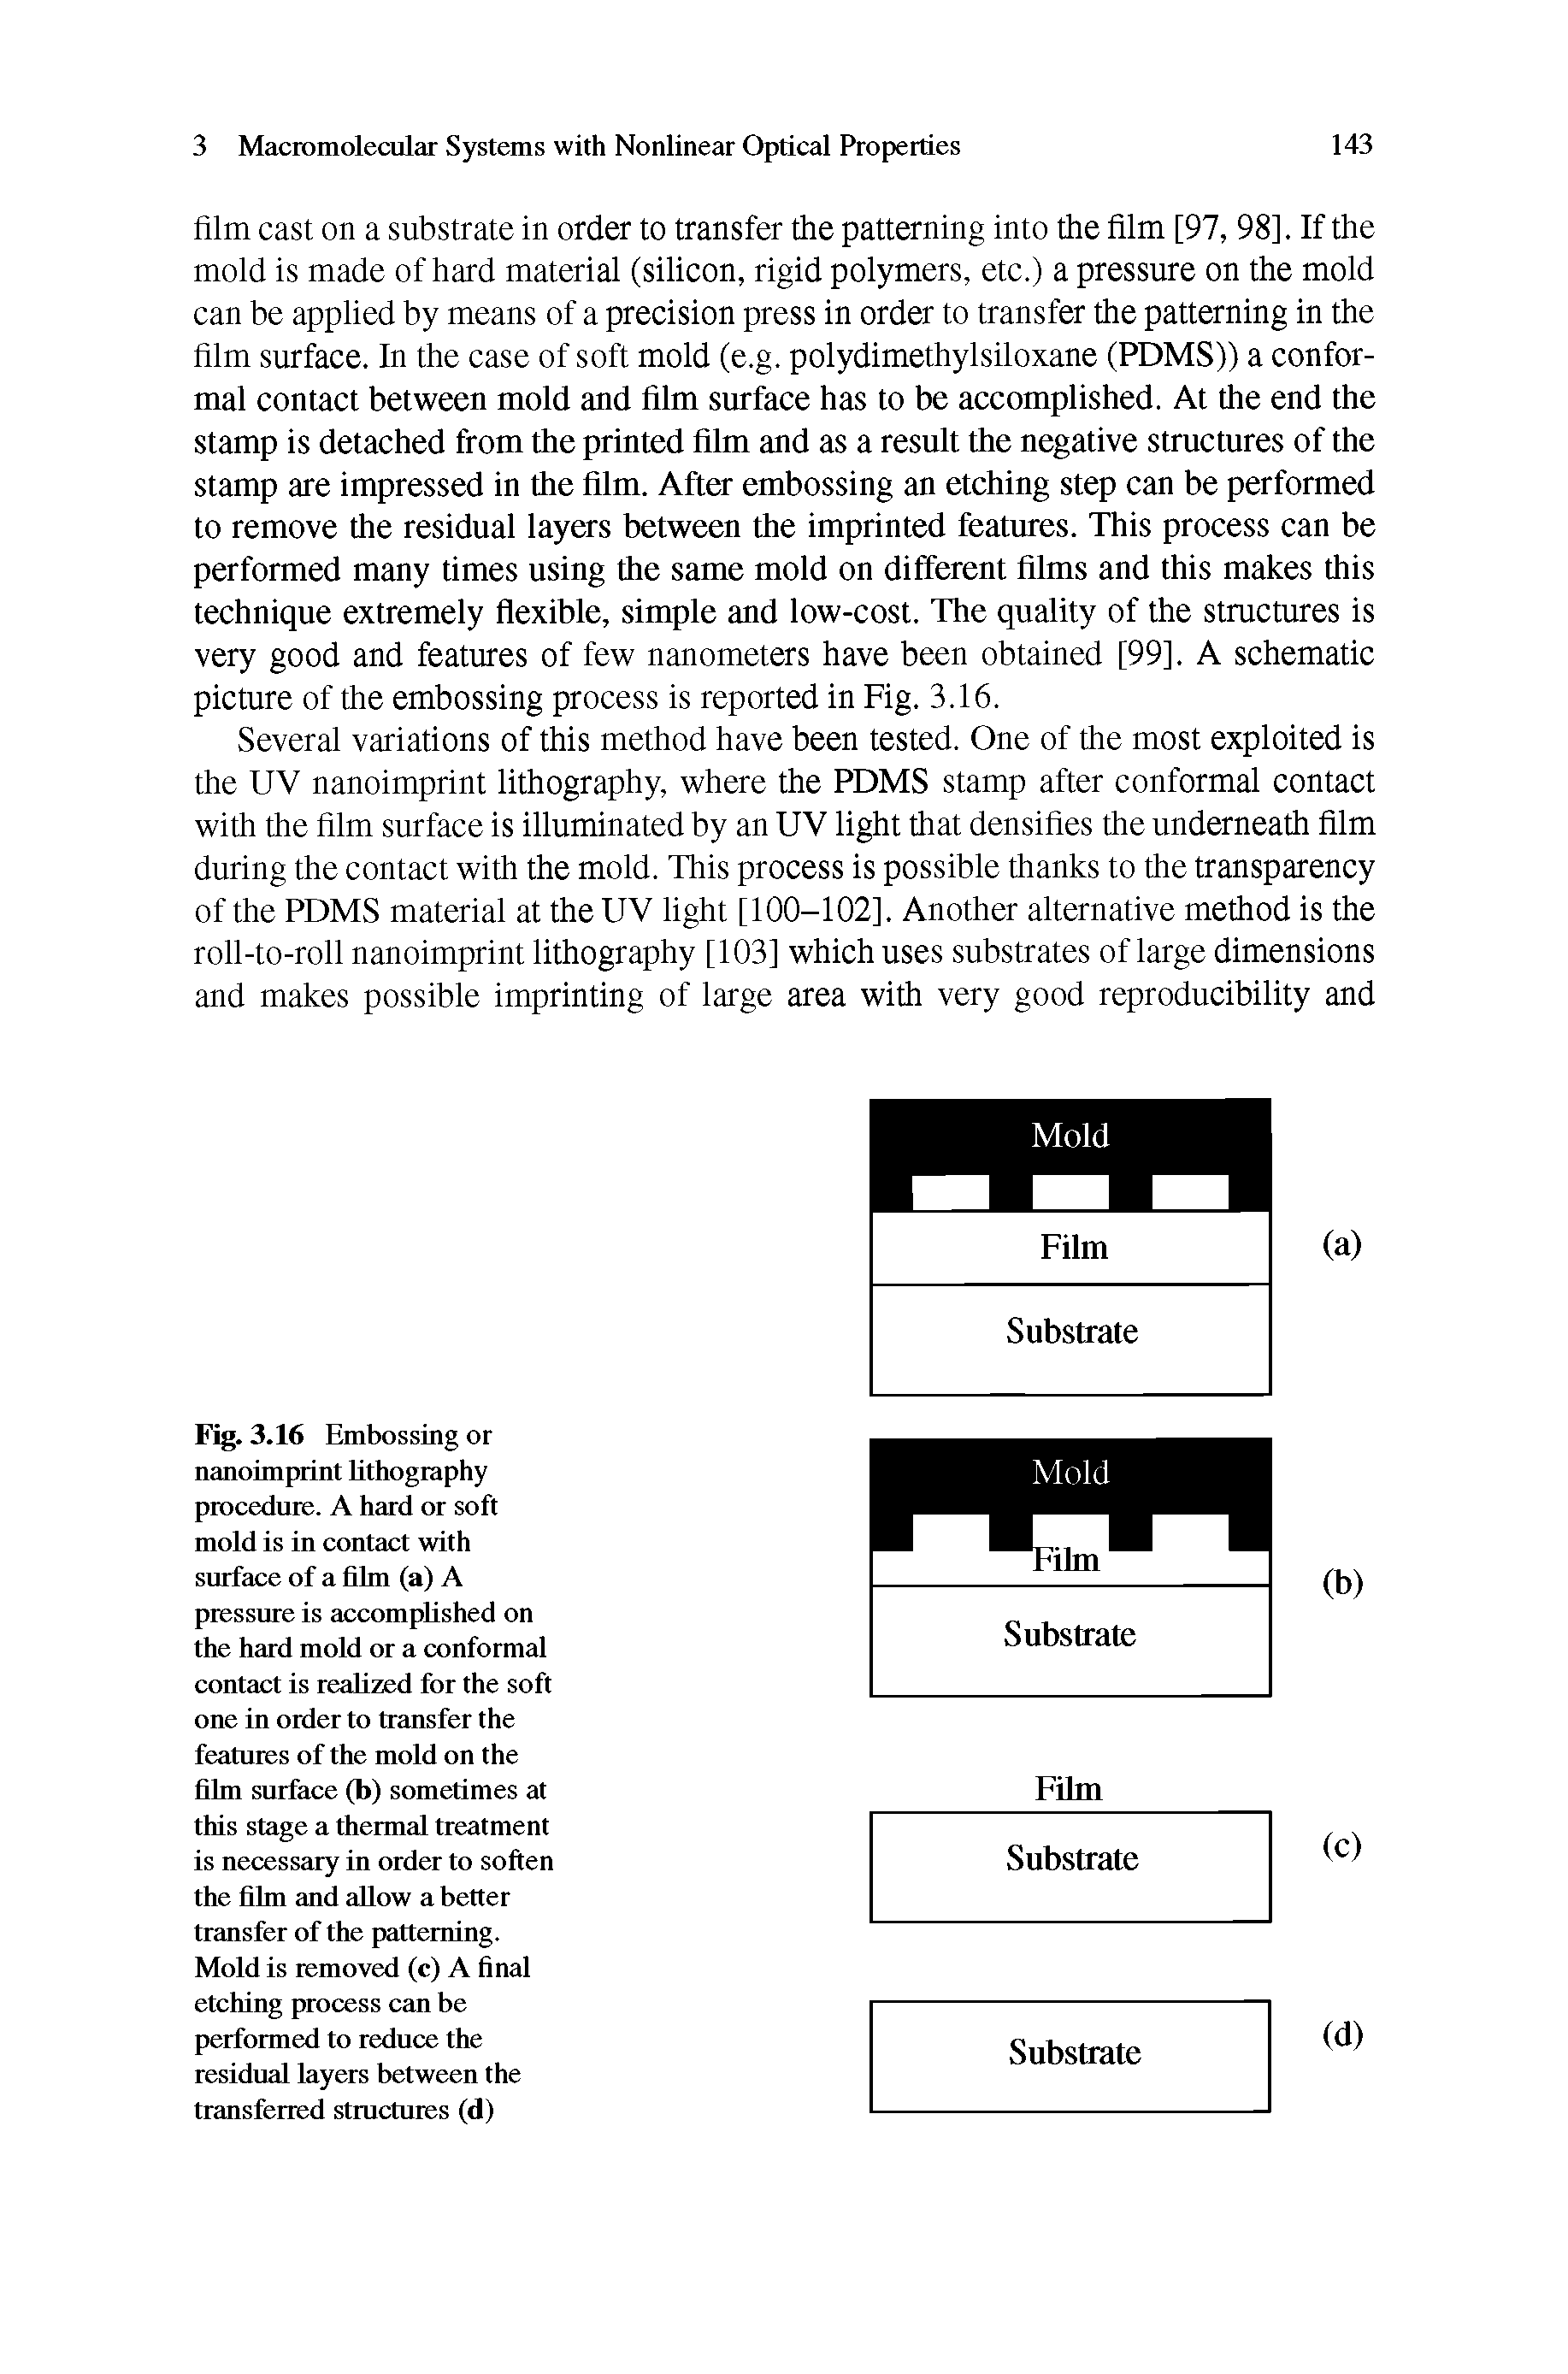 Fig. 3.16 Embossing or nanoimprint lithography procedure. A hard or soft mold is in contact with surface of a film (a) A pressure is accomplished on the hard mold or a conformal contact is realized for the soft one in order to transfer the features of the mold on the film surface (b) sometimes at this stage a thermal treatment is necessary in order to soften the film and allow abetter transfer of the patterning. Mold is removed (c) A final etching process can be performed to reduce the residual layers between the transferred structures (d)...